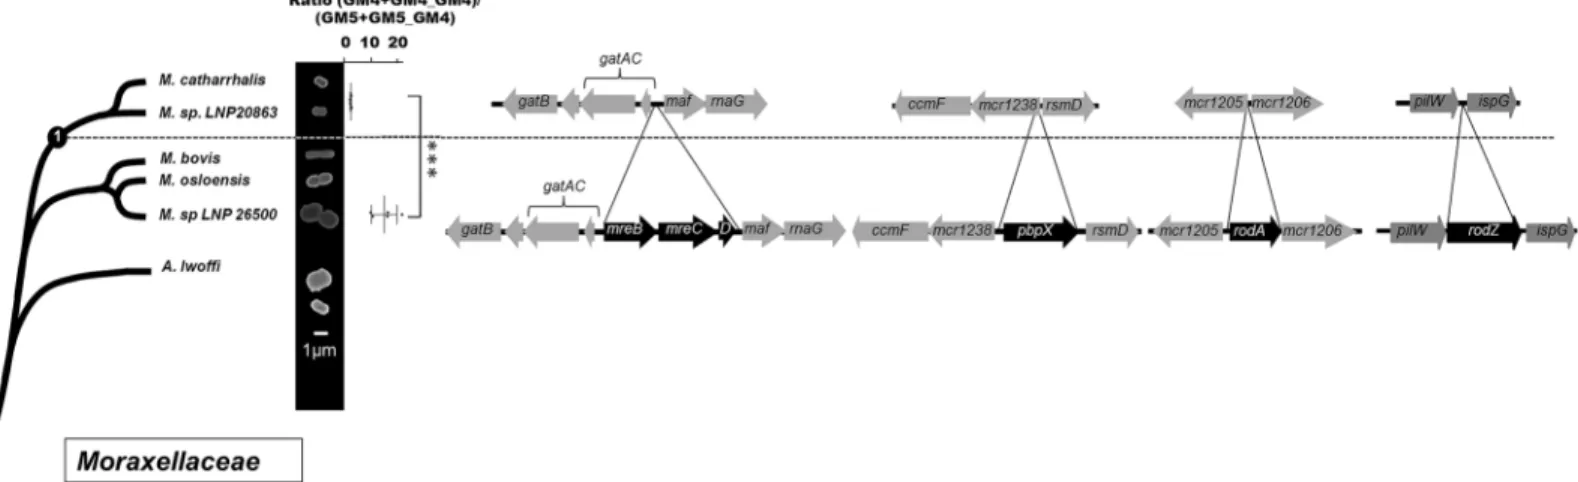 Fig 9. Cell shape and PG structure evolution among the Moraxellaceae family. Schematic phylogeny of the Moraxellaceae family, based on 16s analysis, along with scanning electronic microscopy images of representative species